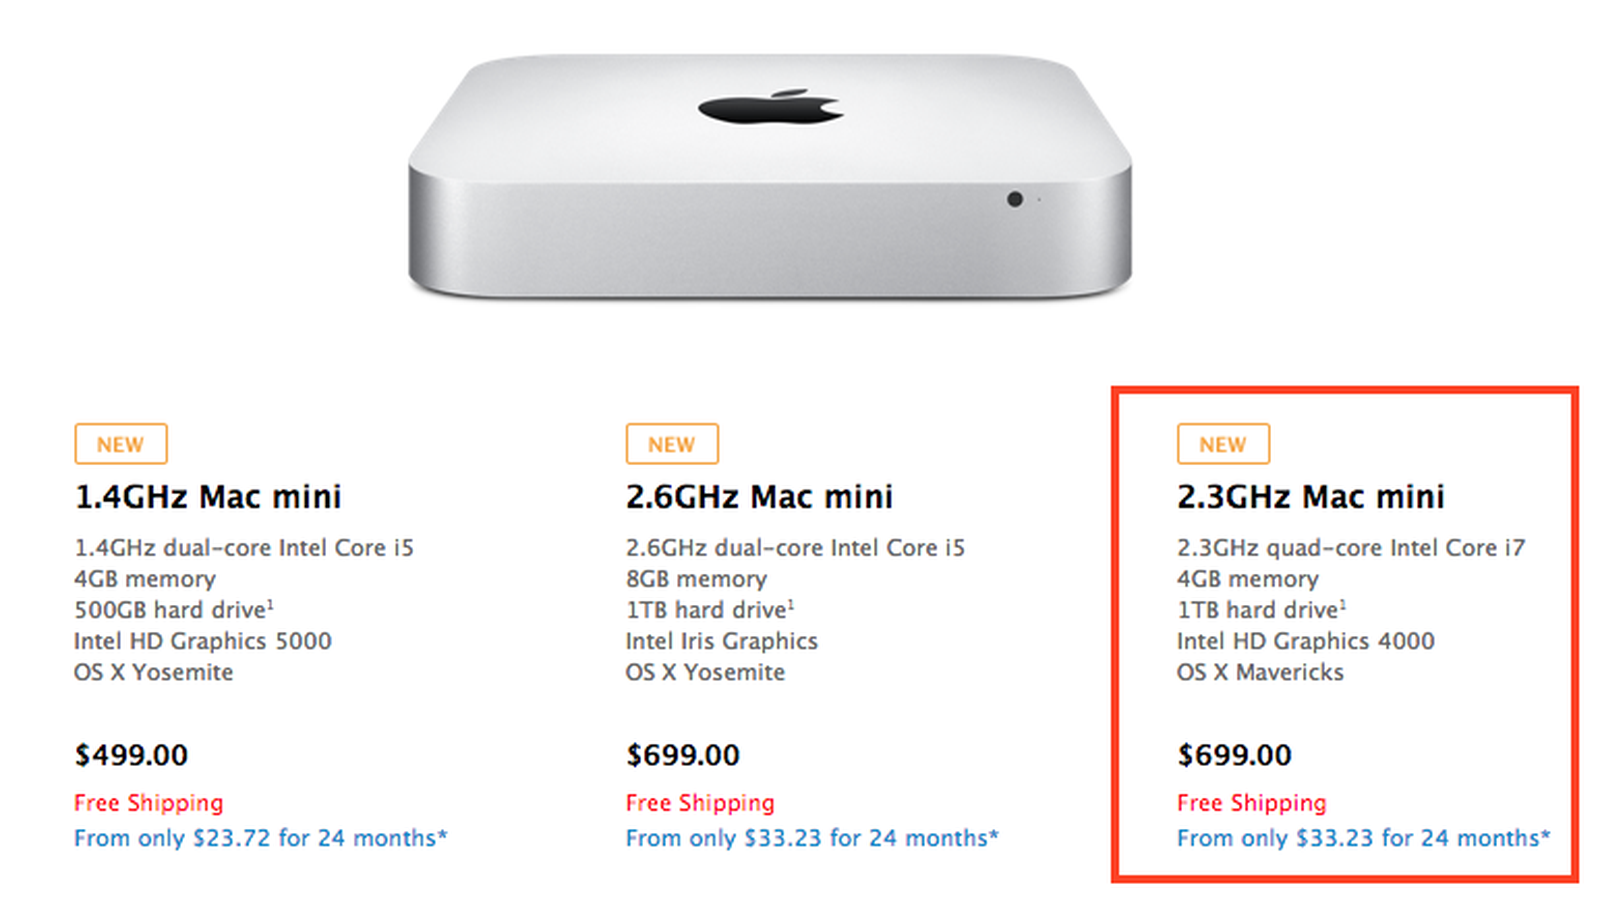 Stable camouflage remember Quad-Core 2012 Mac Mini Mysteriously Reappears on Apple's U.S. Online Store  [Updated] - MacRumors